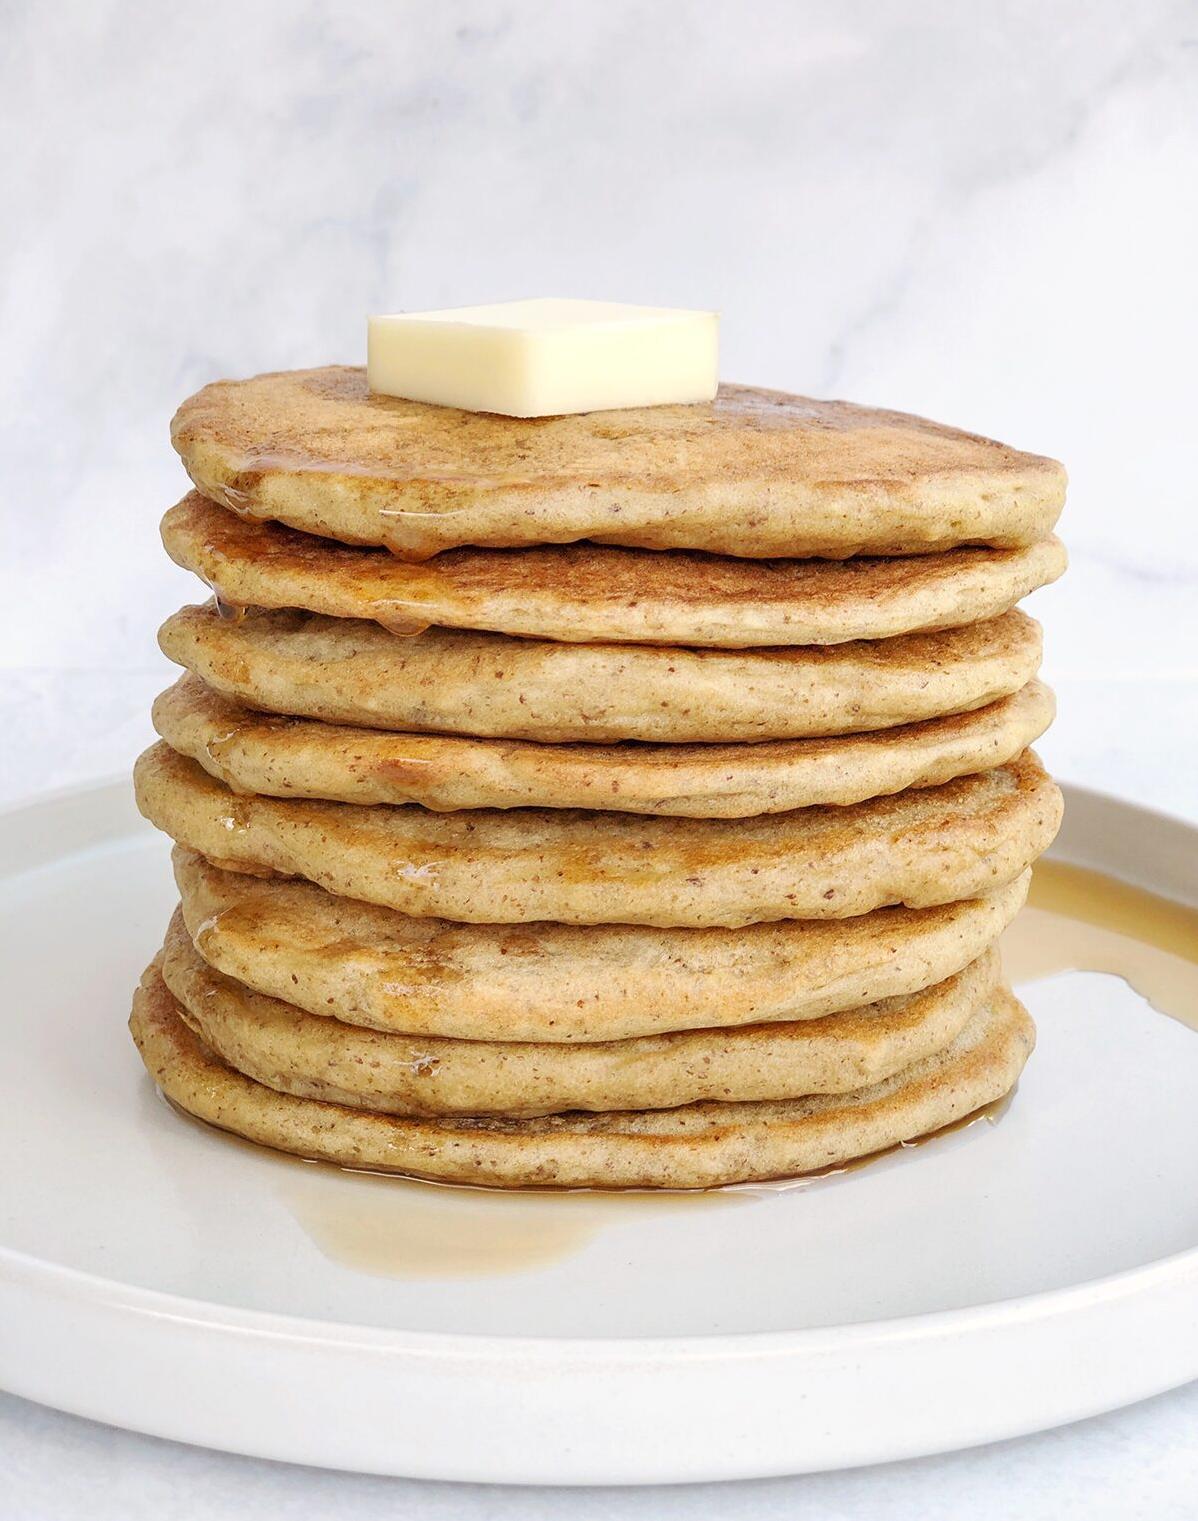  Who says you can't have pancakes on a dairy-free diet? Let's prove them wrong.